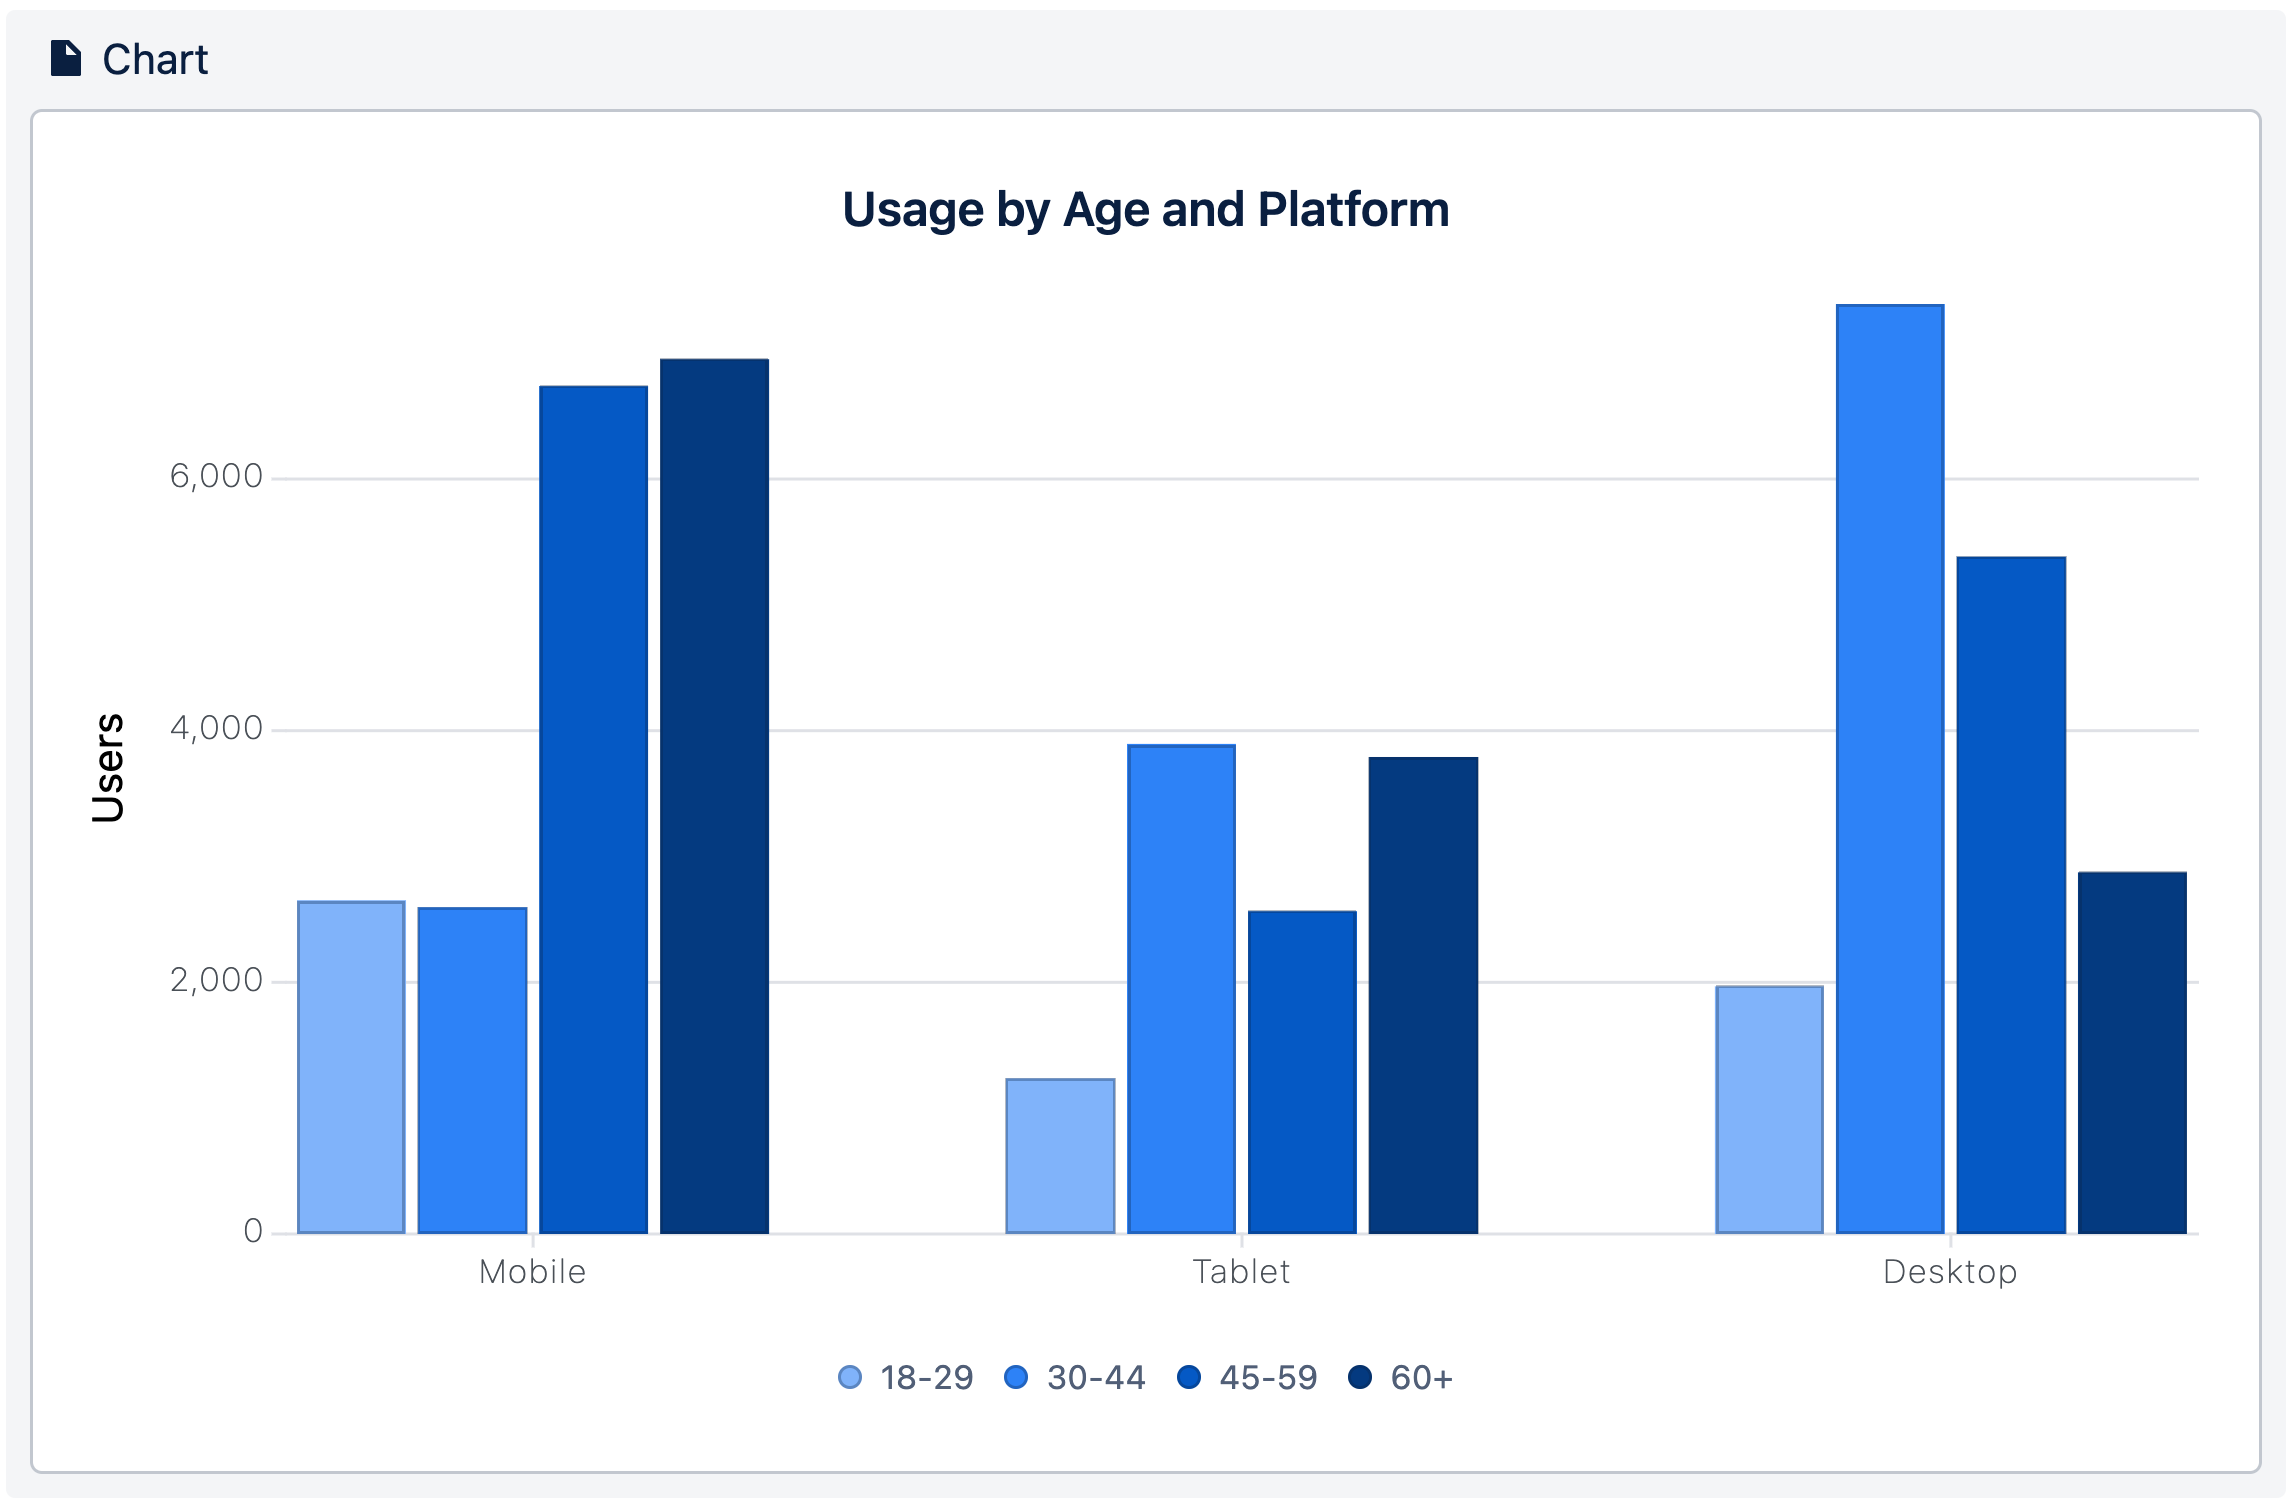 A grouped chart showing platforms grouped by age groups